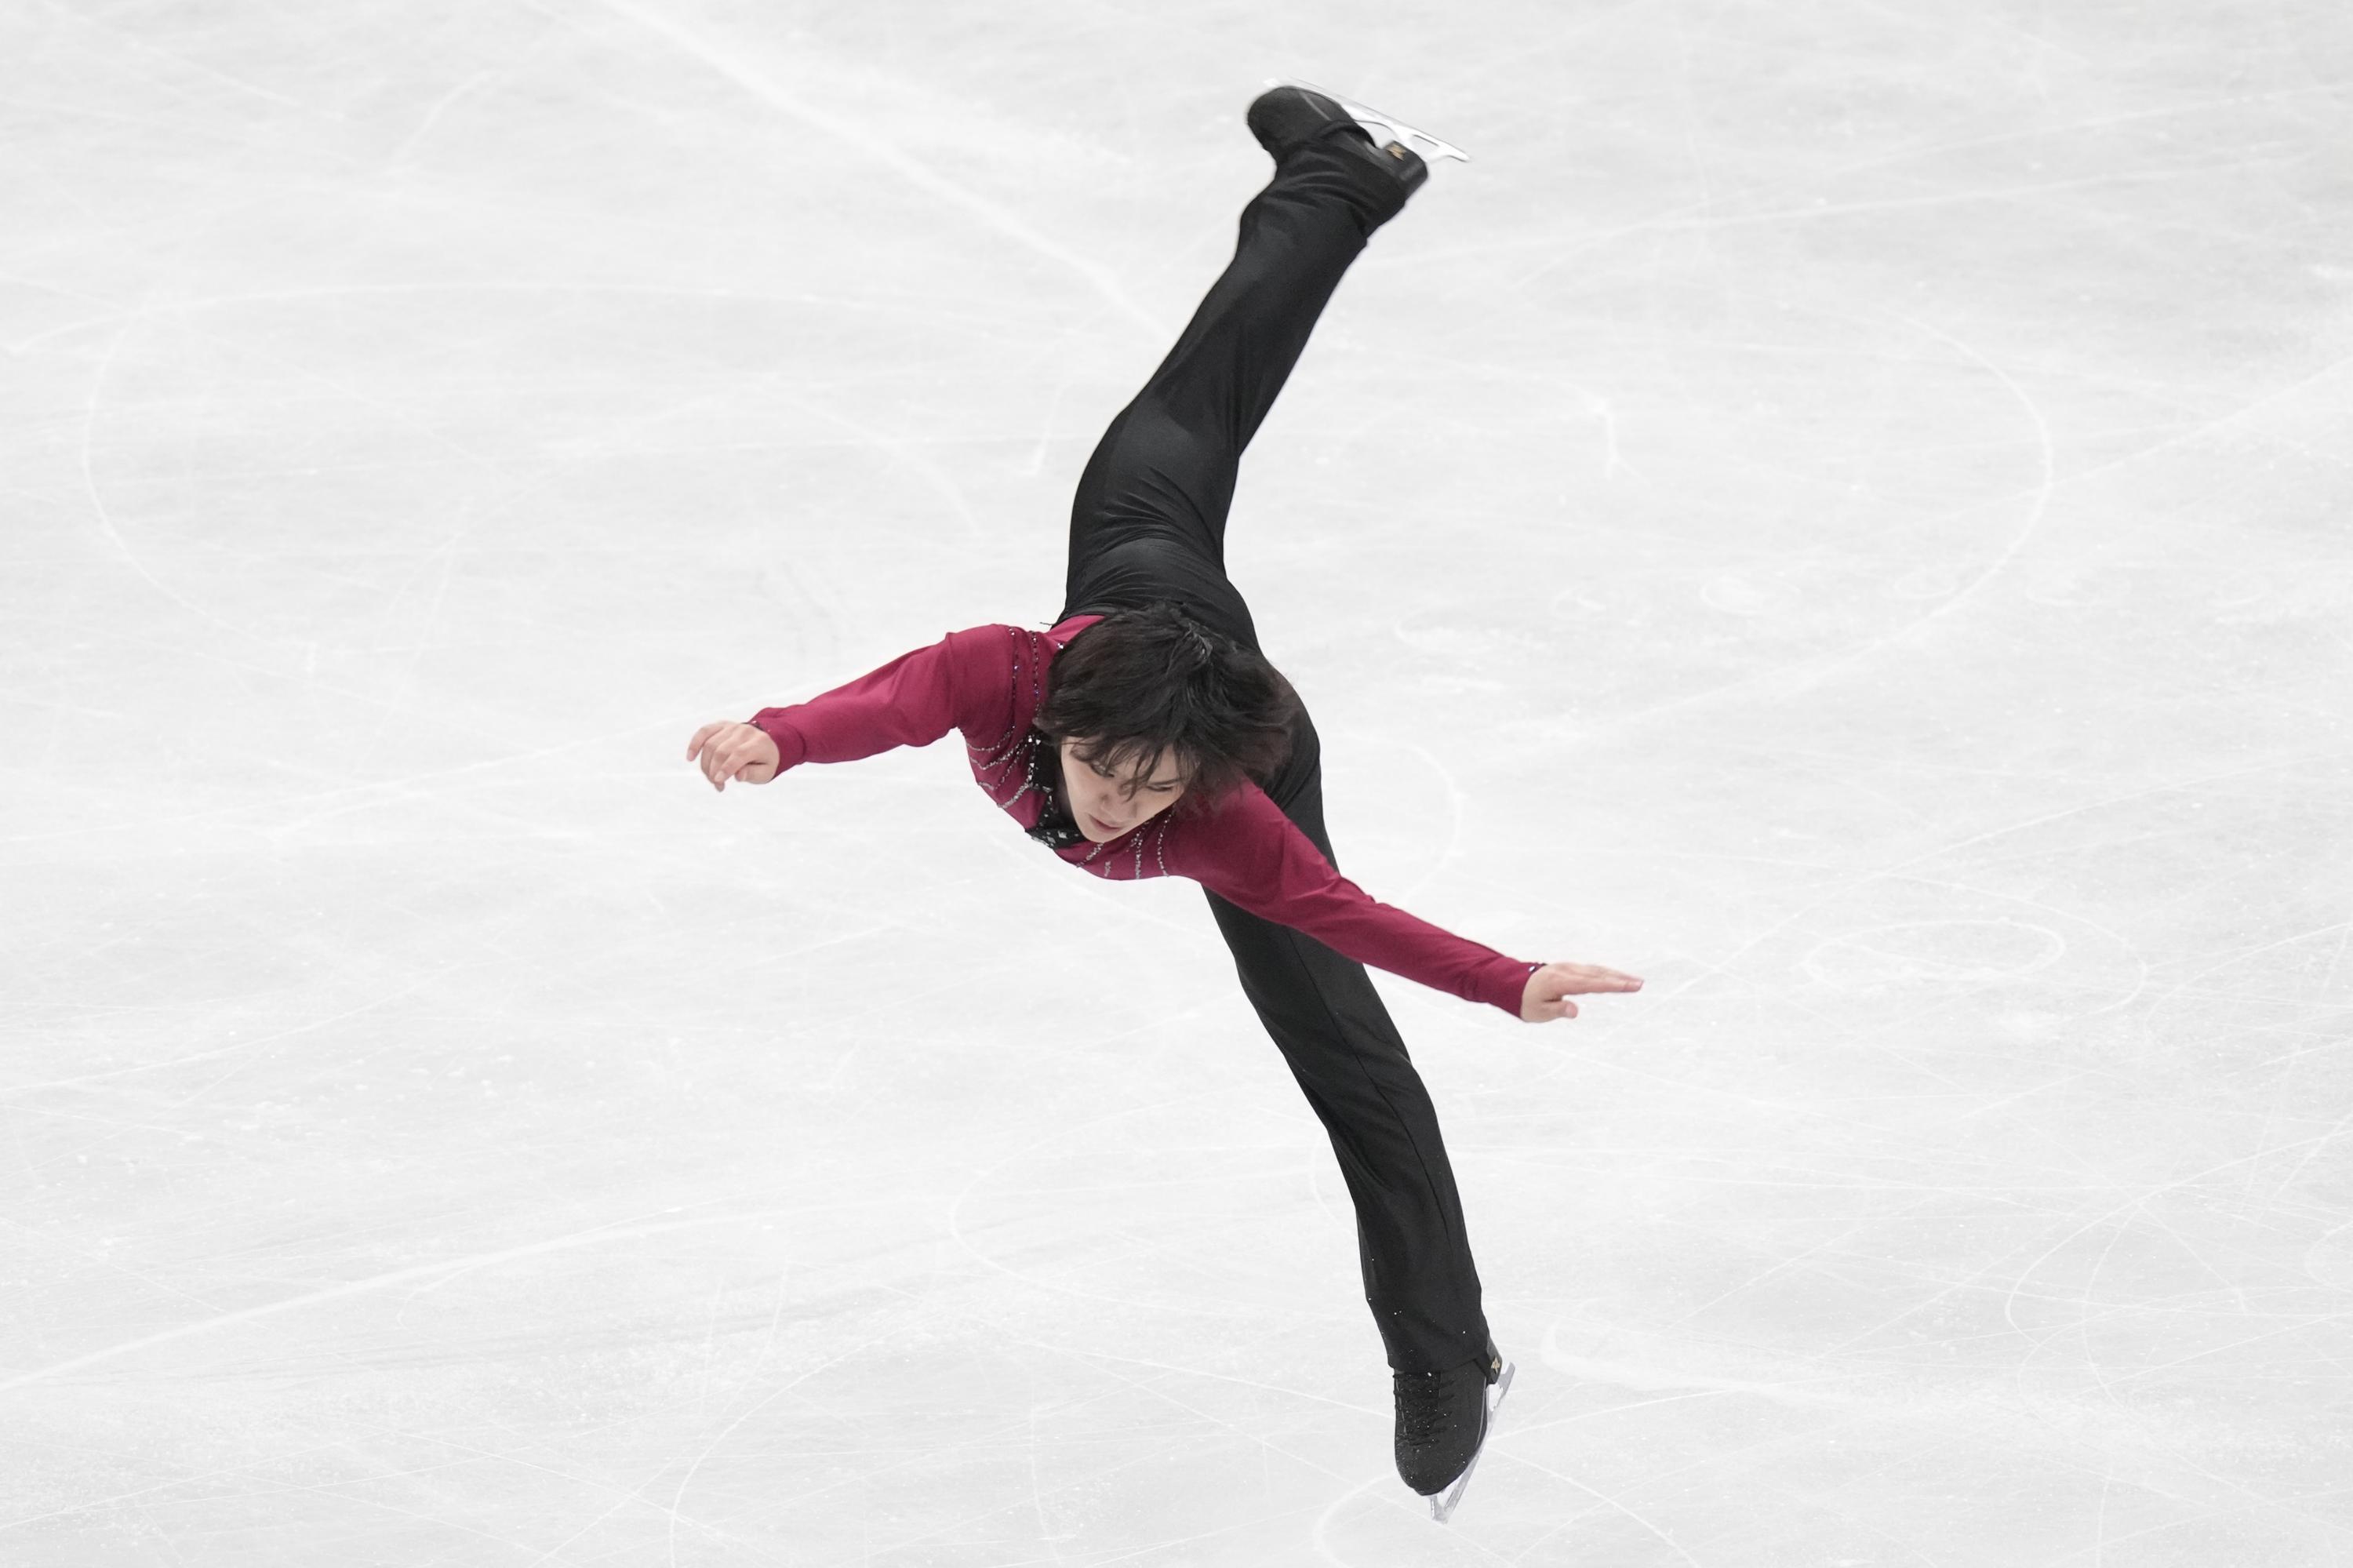 Shoma Uno leads after short program with Ilia Malinin in hot